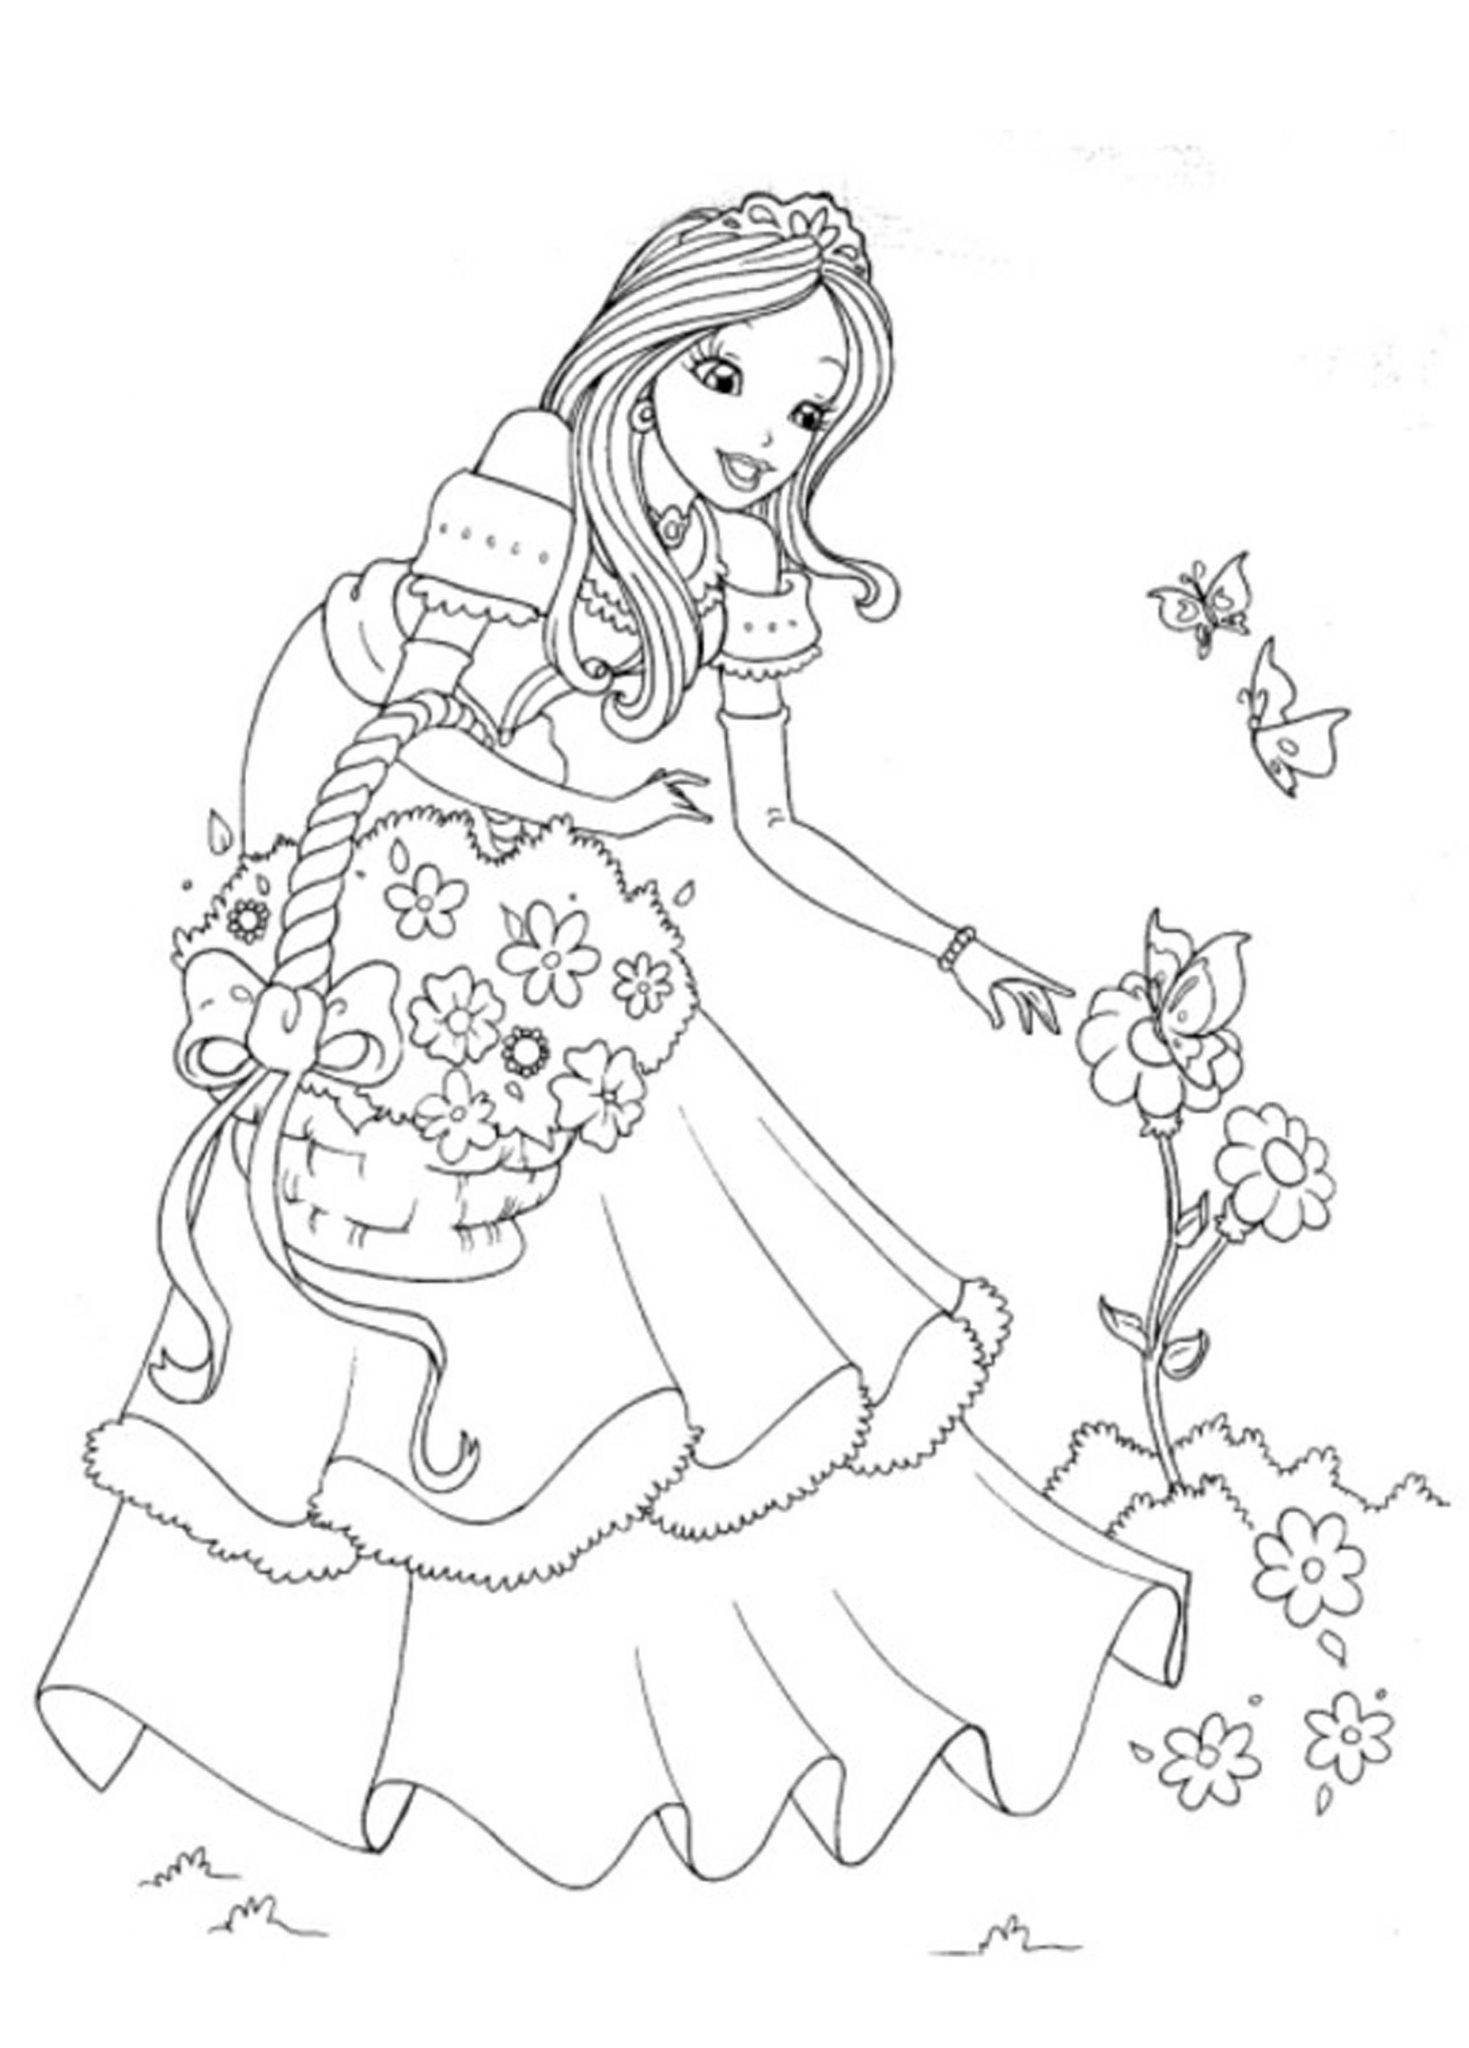 Print & Download - Princess Coloring Pages, Support The ...